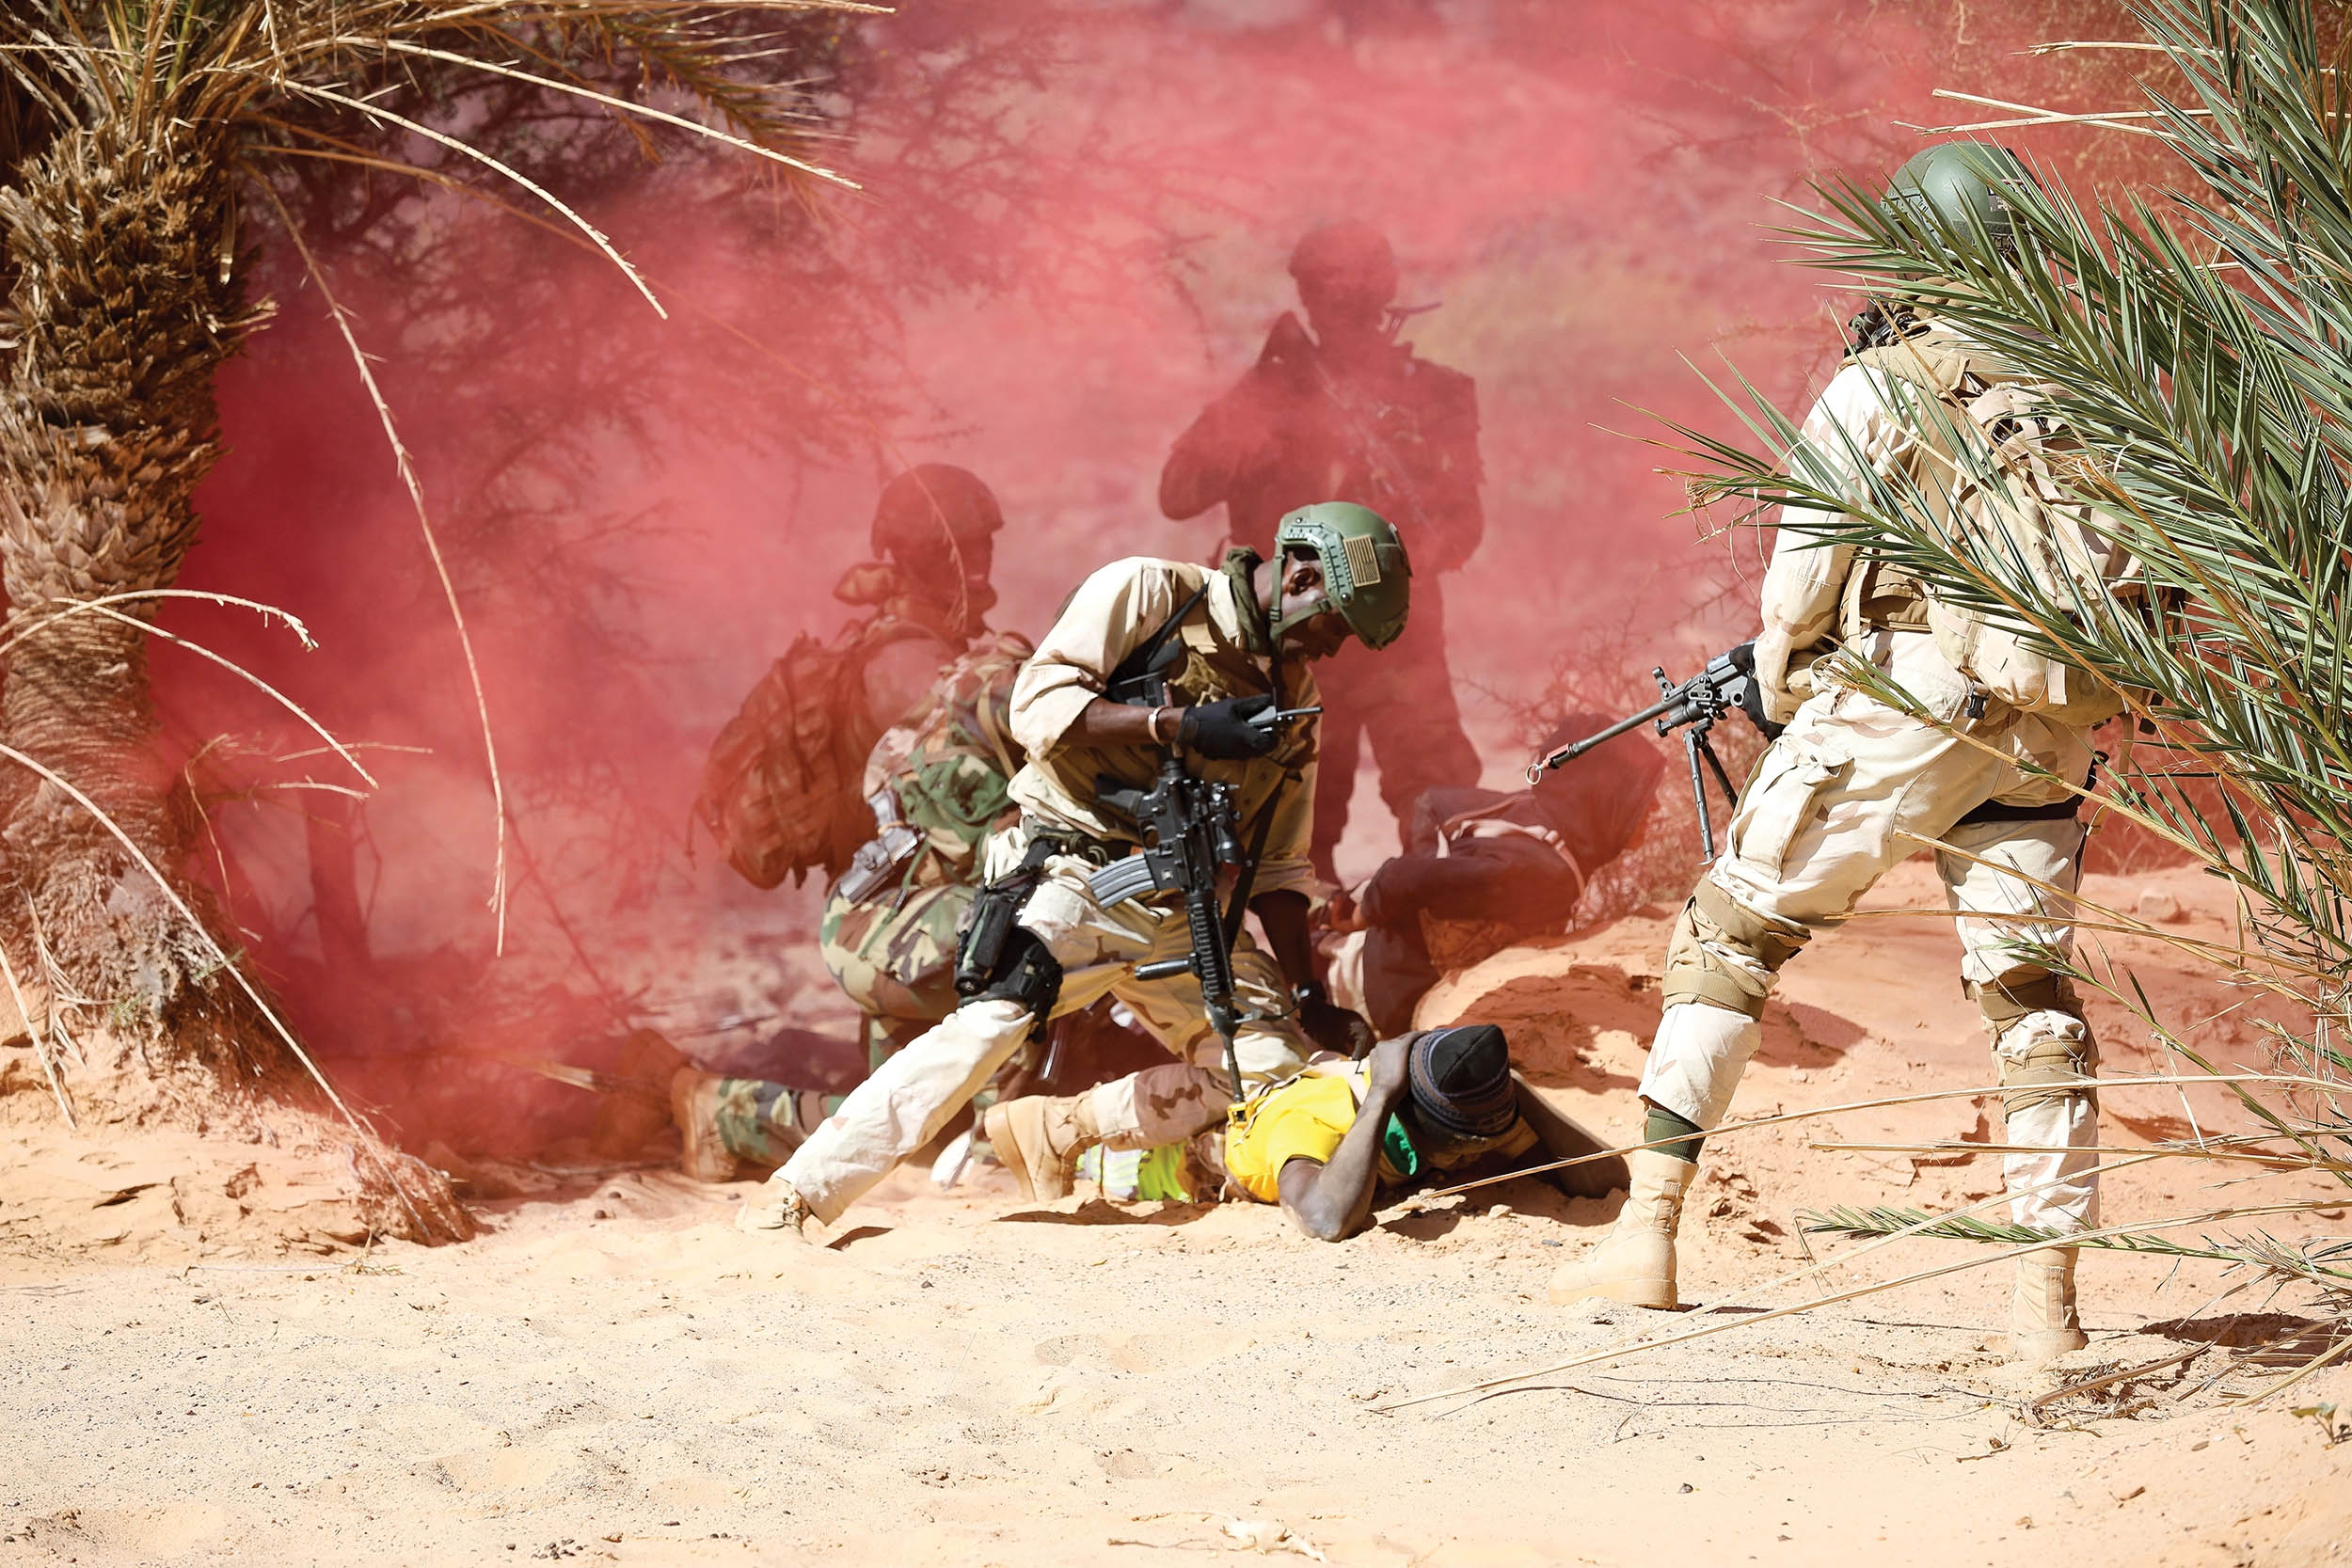 Senegalese soldier secures enemy combatant during simulated raid conducted after
gathering intelligence in pursuit of malign actors as part of Flintlock 20 scenario, near
Atar, Mauritania, on February 26, 2020 (U.S. Army/Conner Douglas)